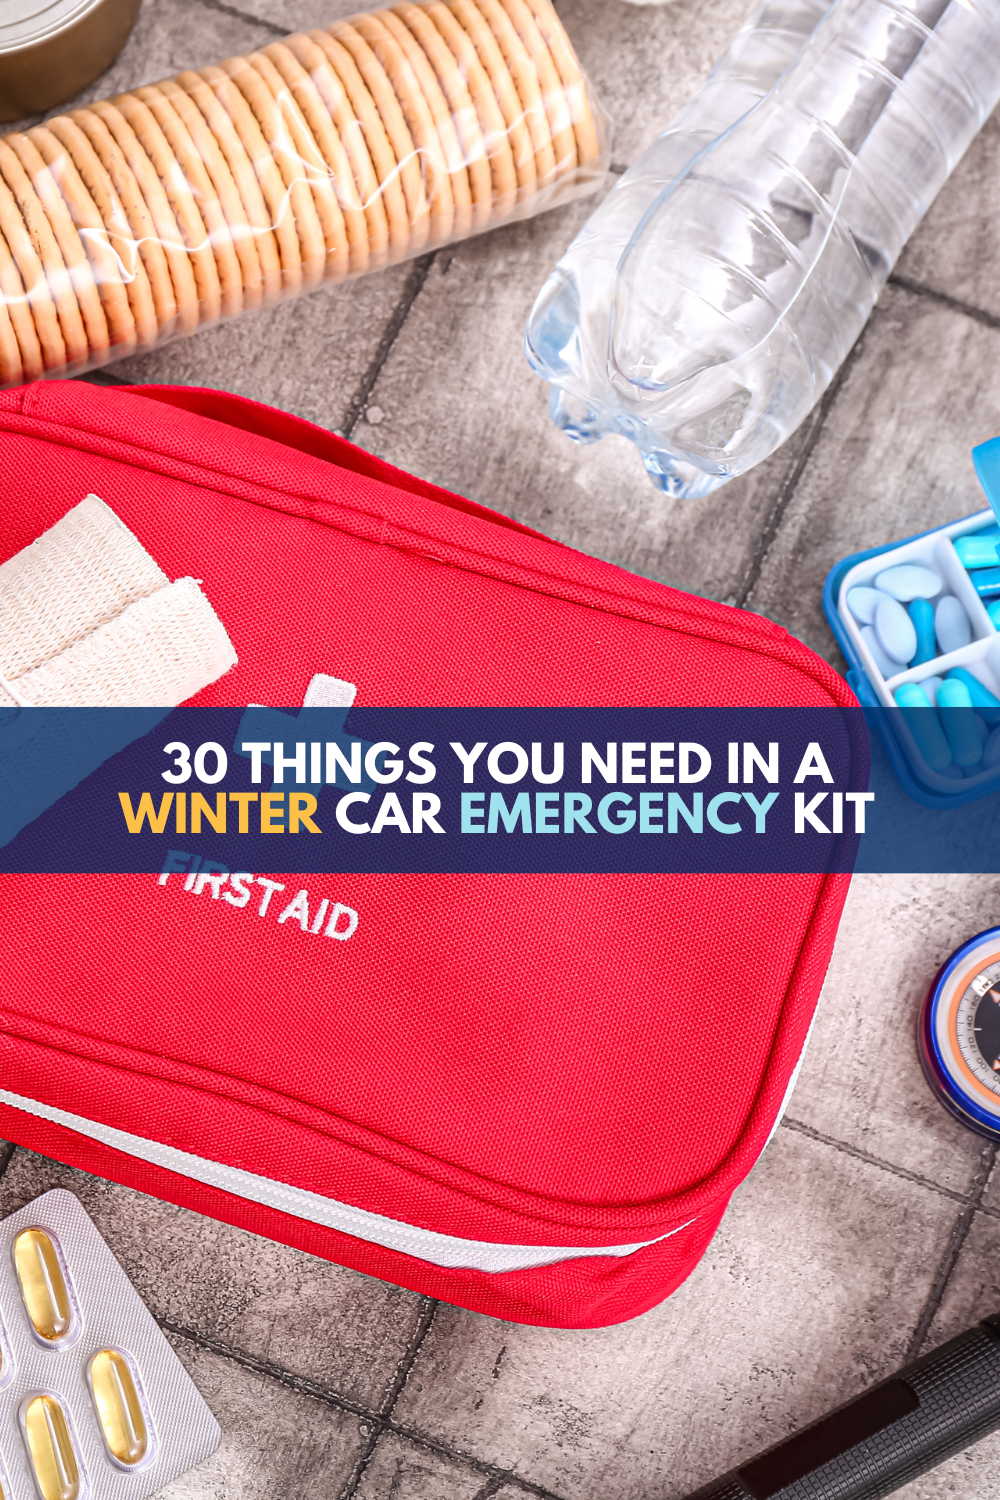 Winter Car Emergency Kit: What to Keep in Your Car